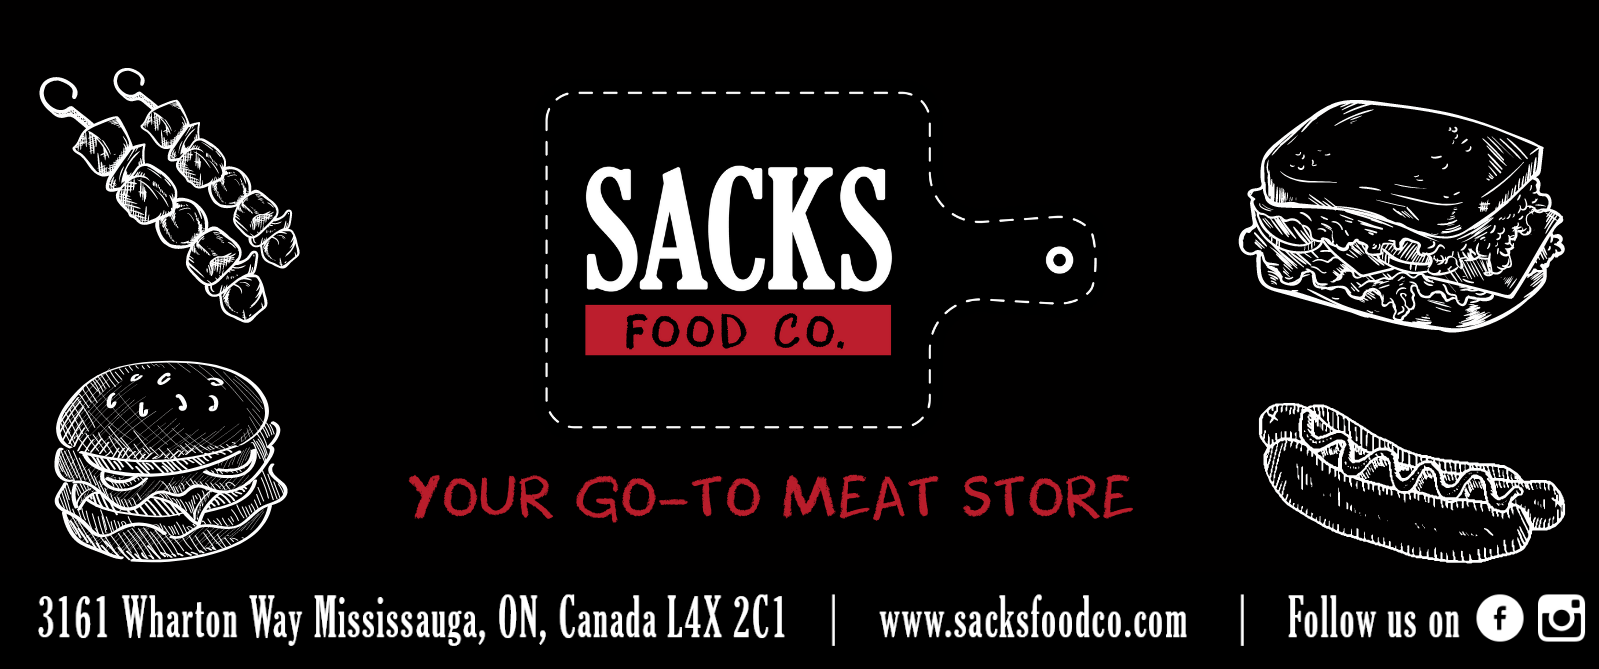 Sacks Food Co | Your go-to Meat Store